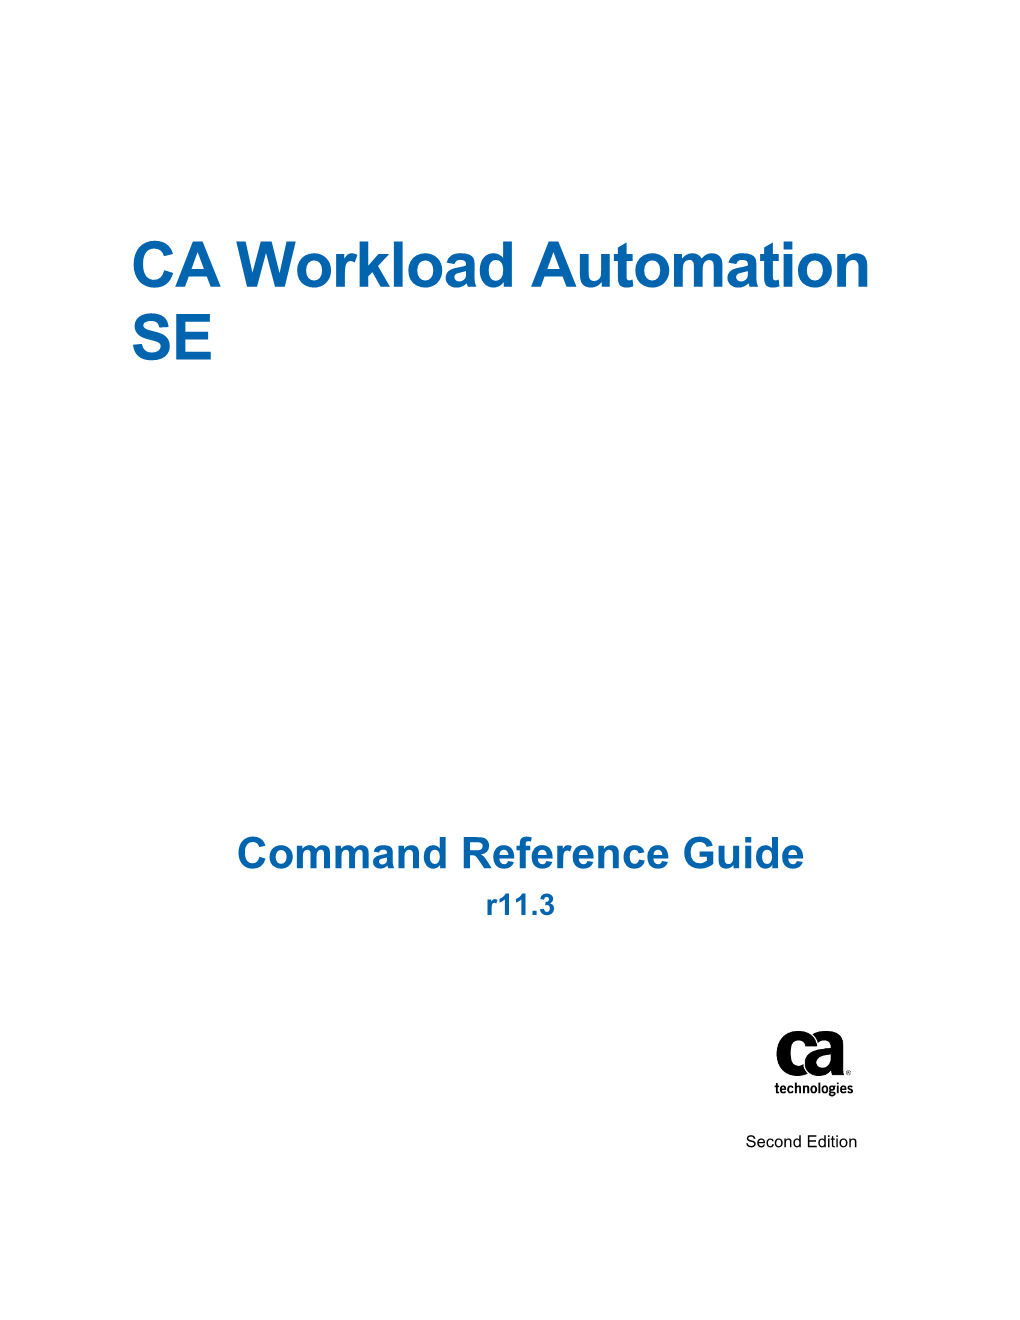 CA Workload Automation SE Command Reference Guide